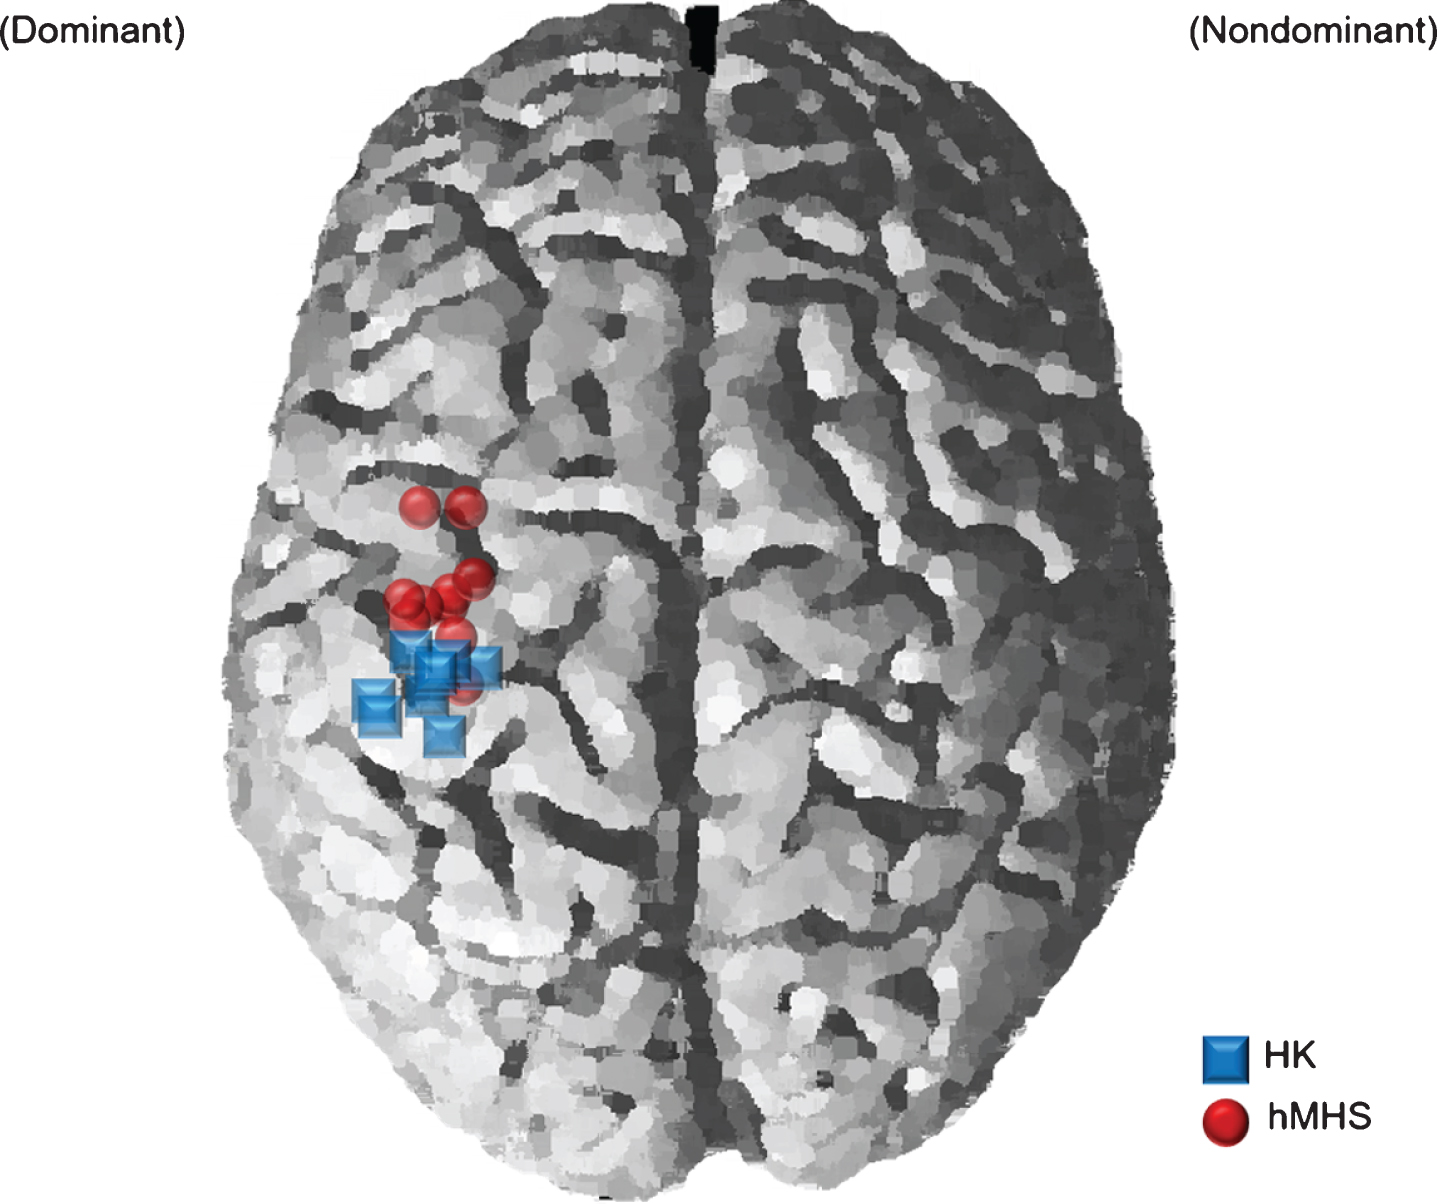 Comparison of repetitive transcranial magnetic stimulation (rTMS) target Montreal Neurological Institute (MNI) locations between the motor hotspot and the hand-knob. The blue squares represent the individual MNI locations of the hand knobs (HK), and the red circles represent the individual MNI locations of hand motor hotspots (hMHS). rTMS, repetitive transcranial magnetic stimulation; MNI, Montreal Neurological Institute; HK, anatomical hand knob; hMHS, hand motor hotspot